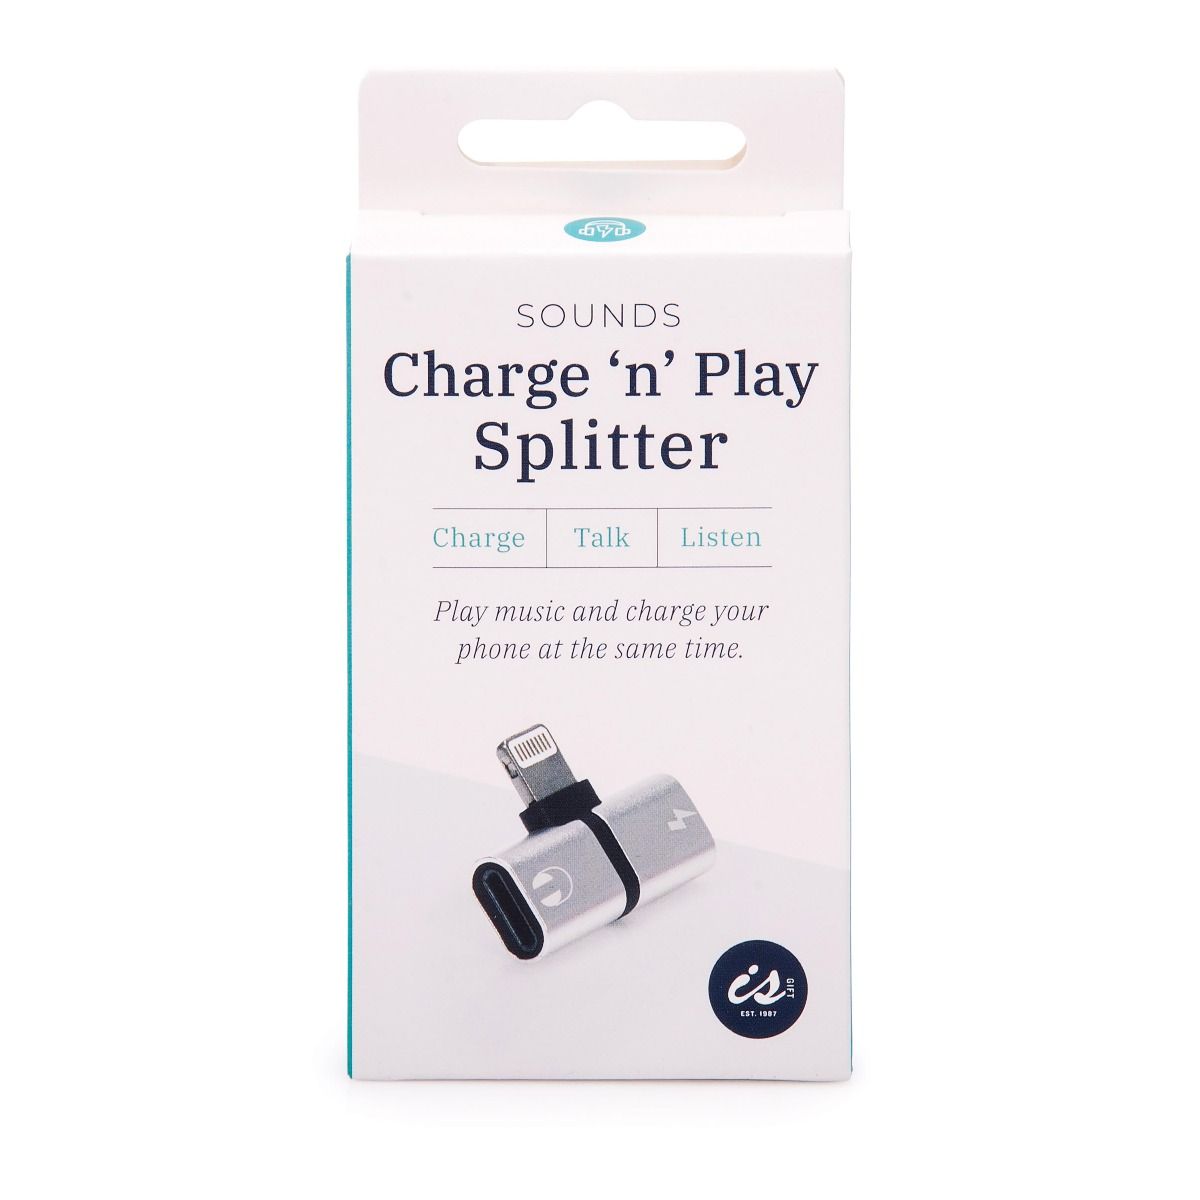 Charge n Play Splitter-Games & Novelty-IS Gift-The Bay Room